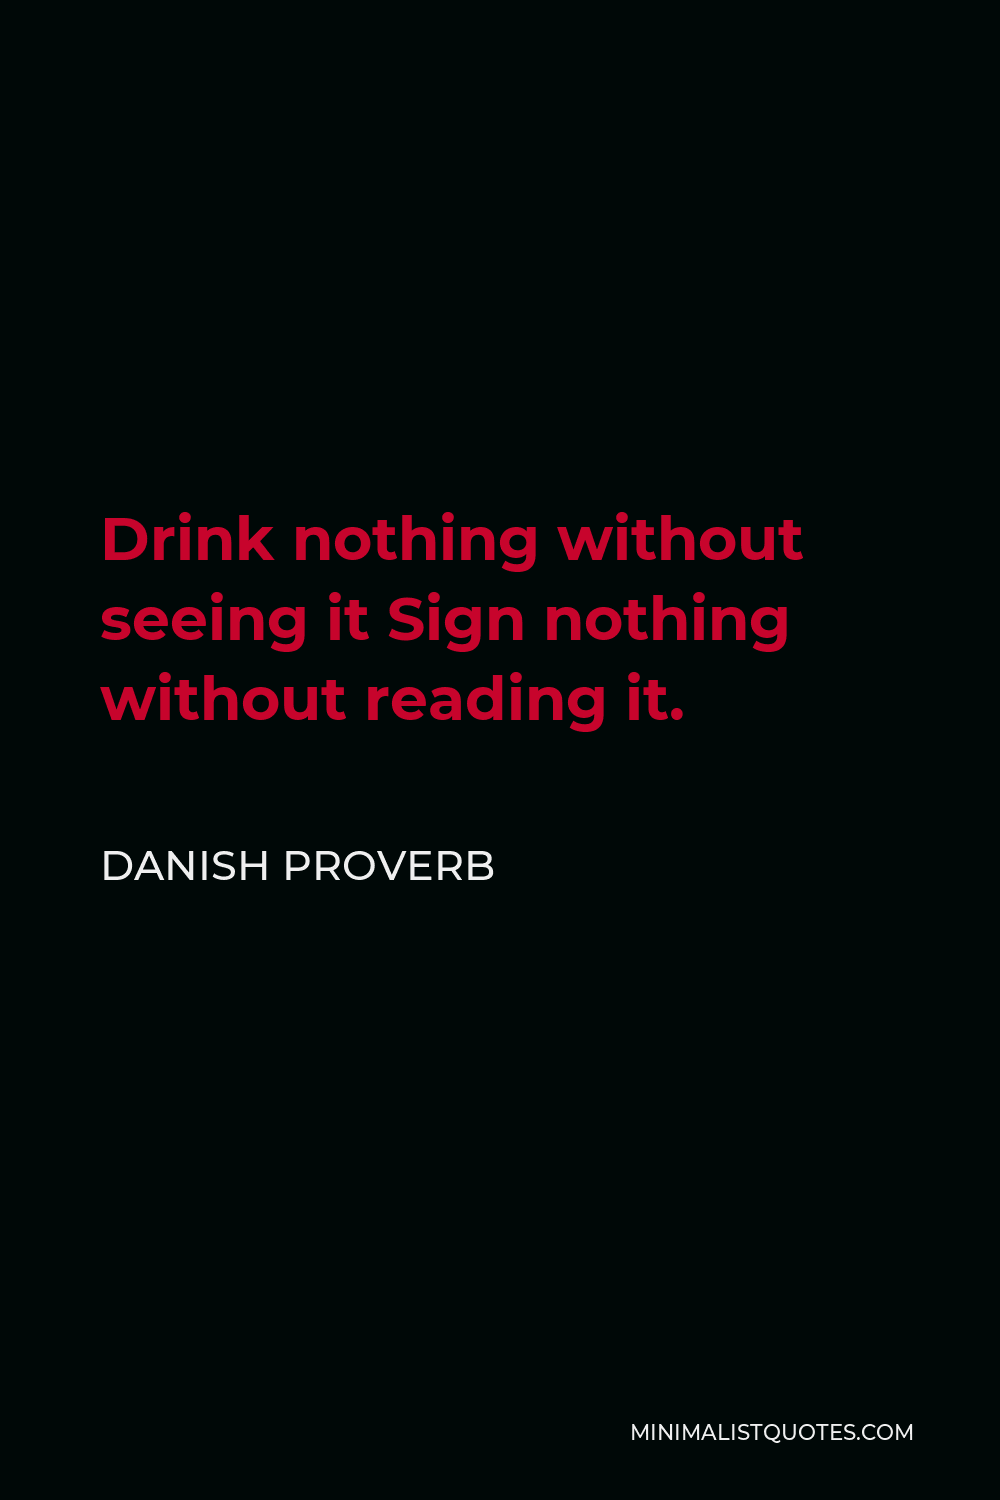 Danish Proverb Quote - Drink nothing without seeing it Sign nothing without reading it.